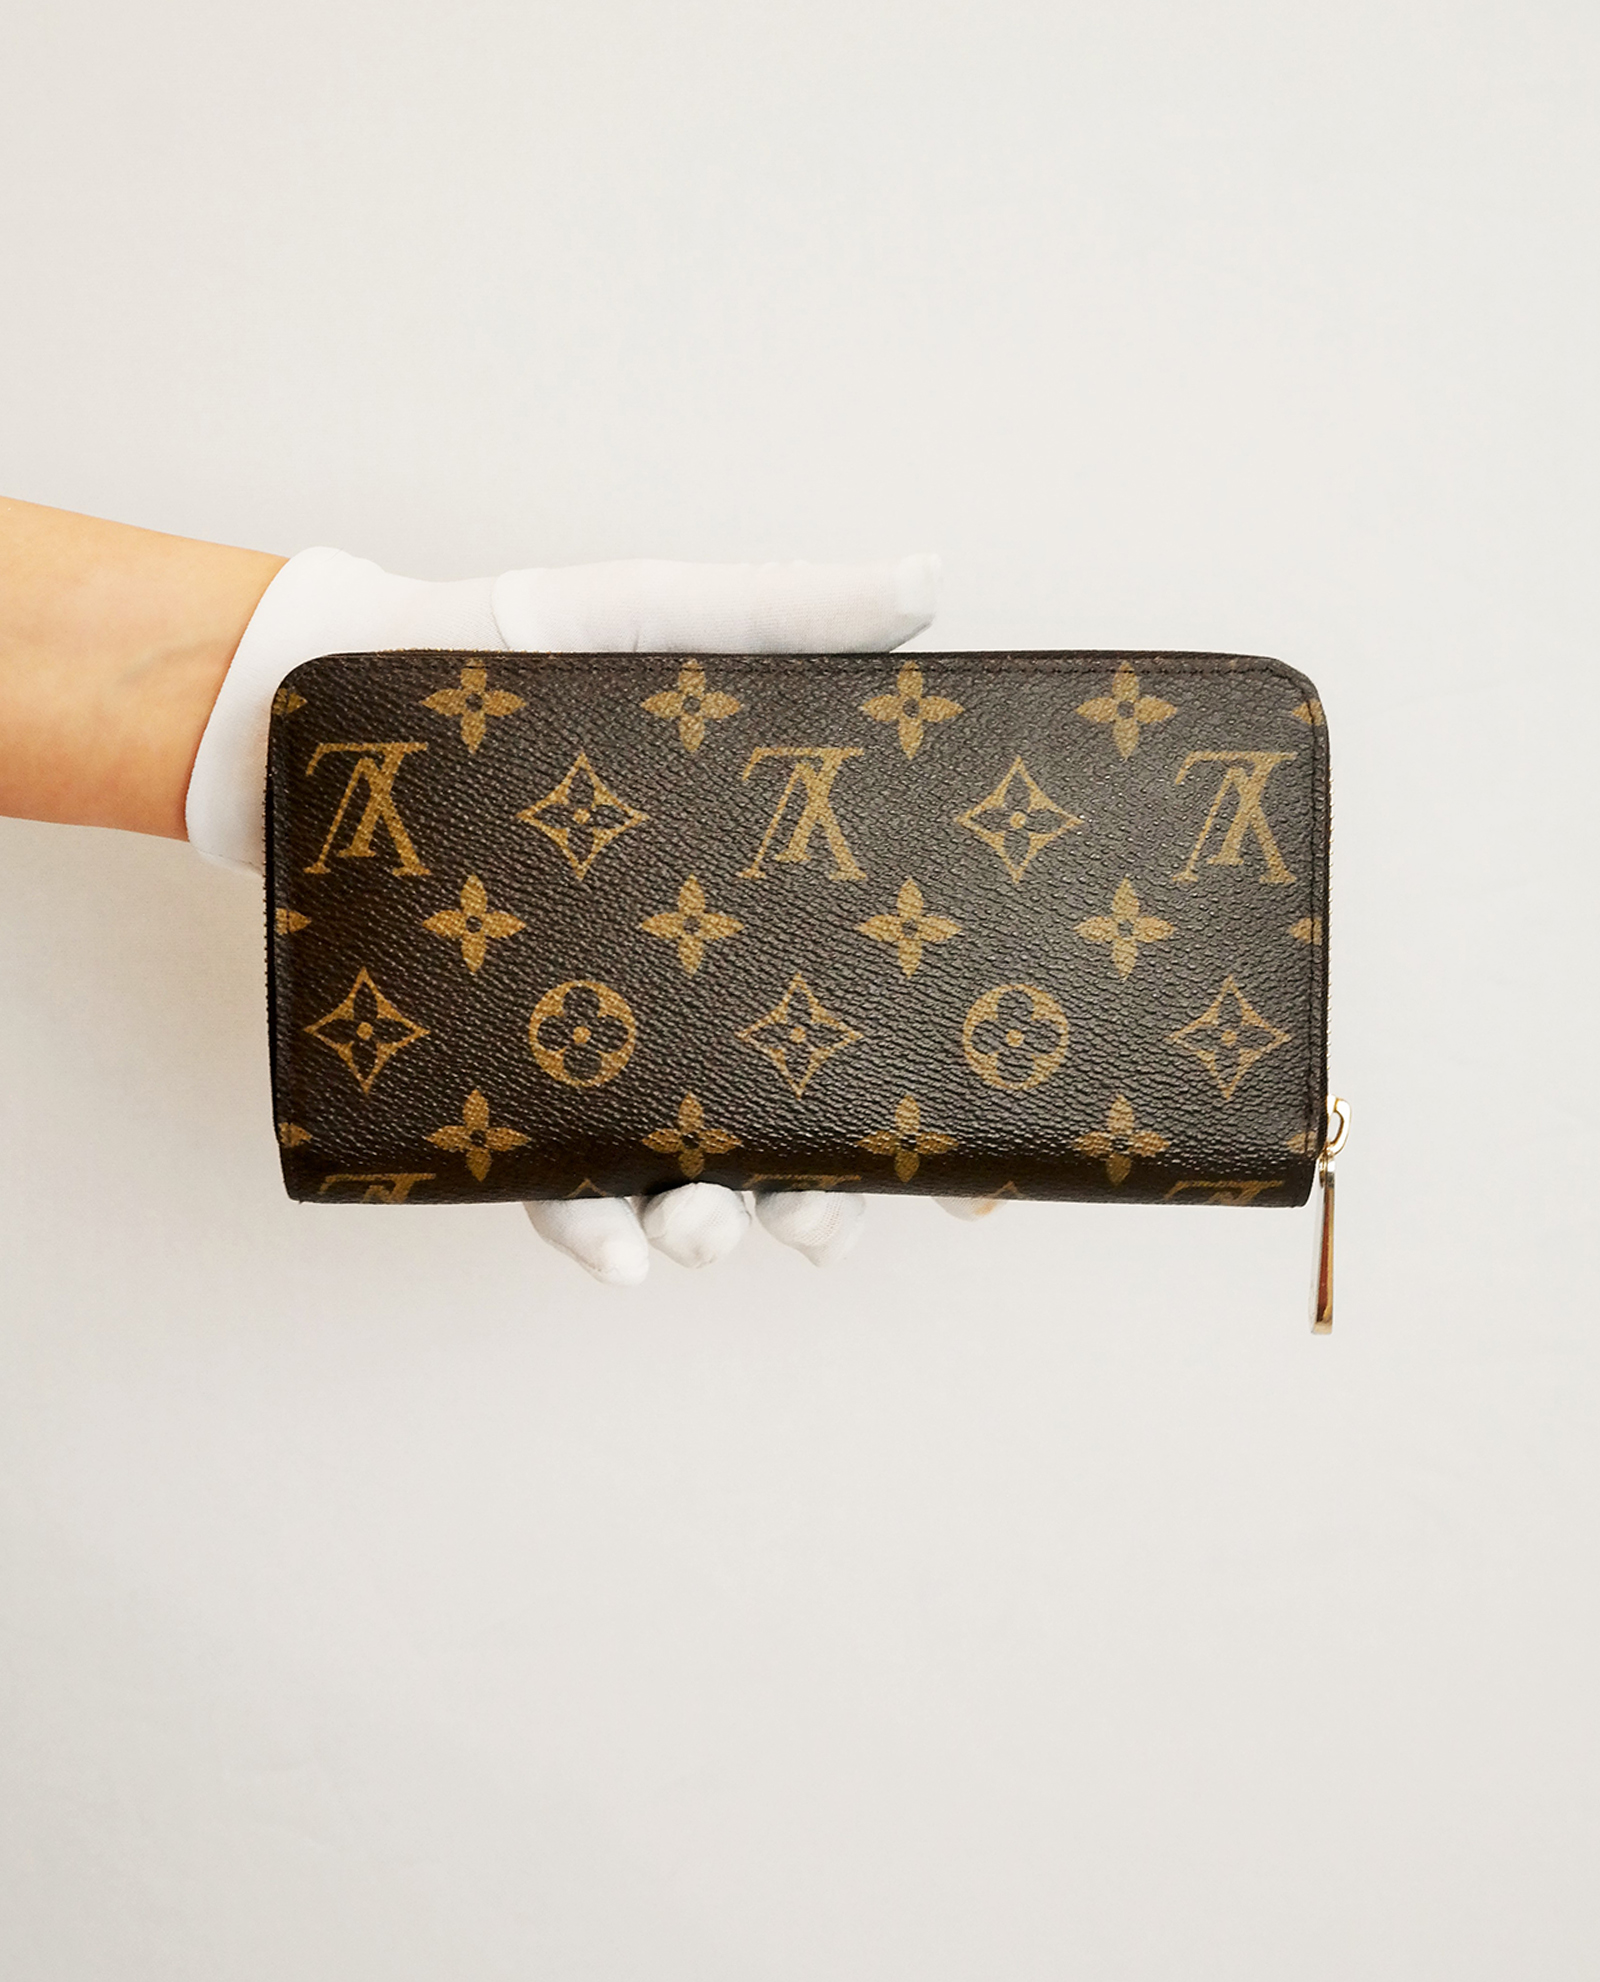 Designer Exchange Ltd - We are on the hunt for Louis Vuitton wallets, big &  small 😍 Have you got one to sell? Simply send us a DM with pictures and we